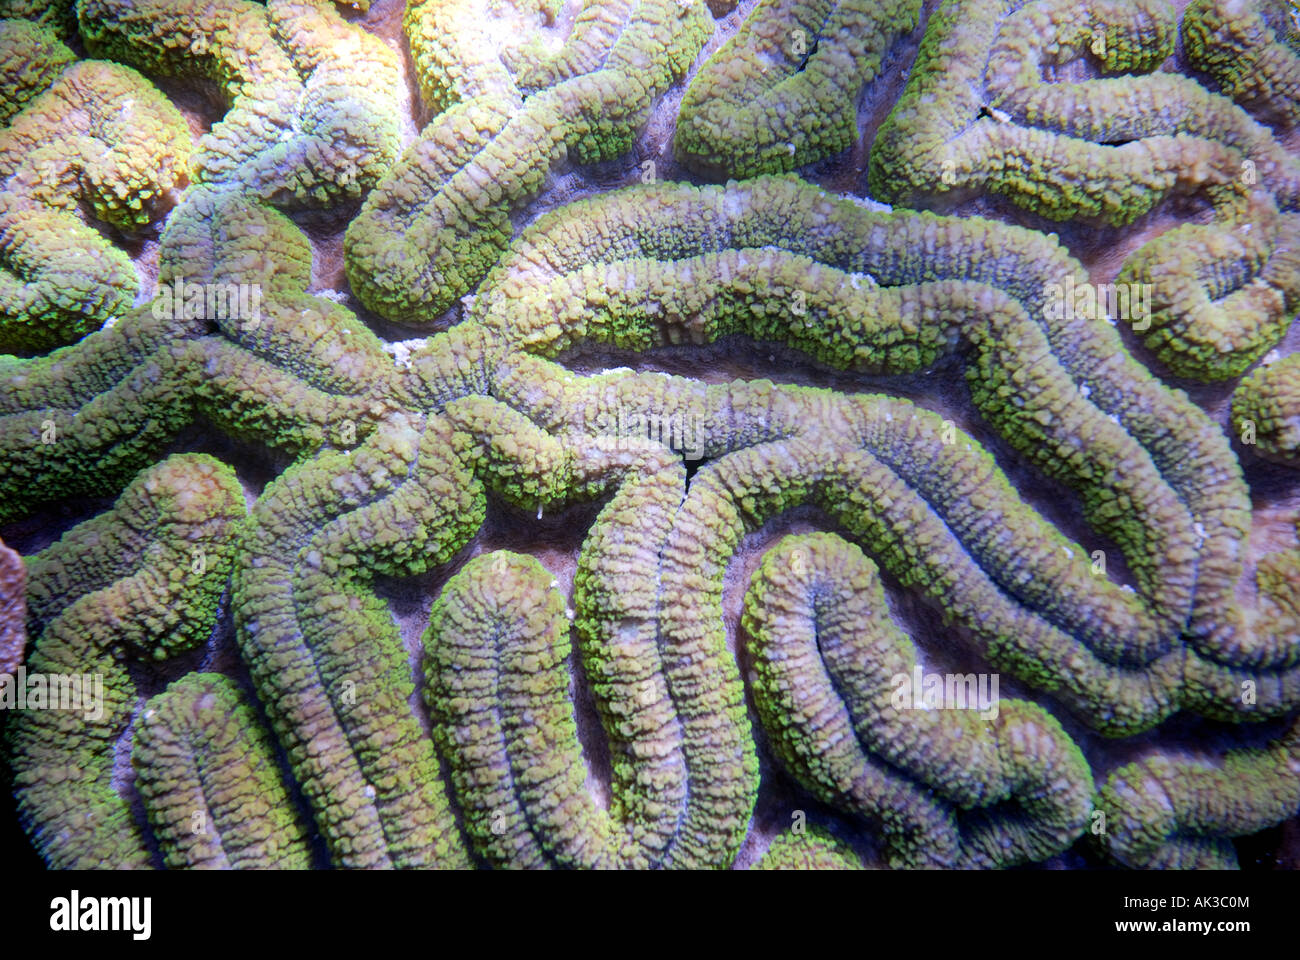 Detail of polyps of a mussid coral Ningaloo Reef Marine Park Western  Australia Stock Photo - Alamy